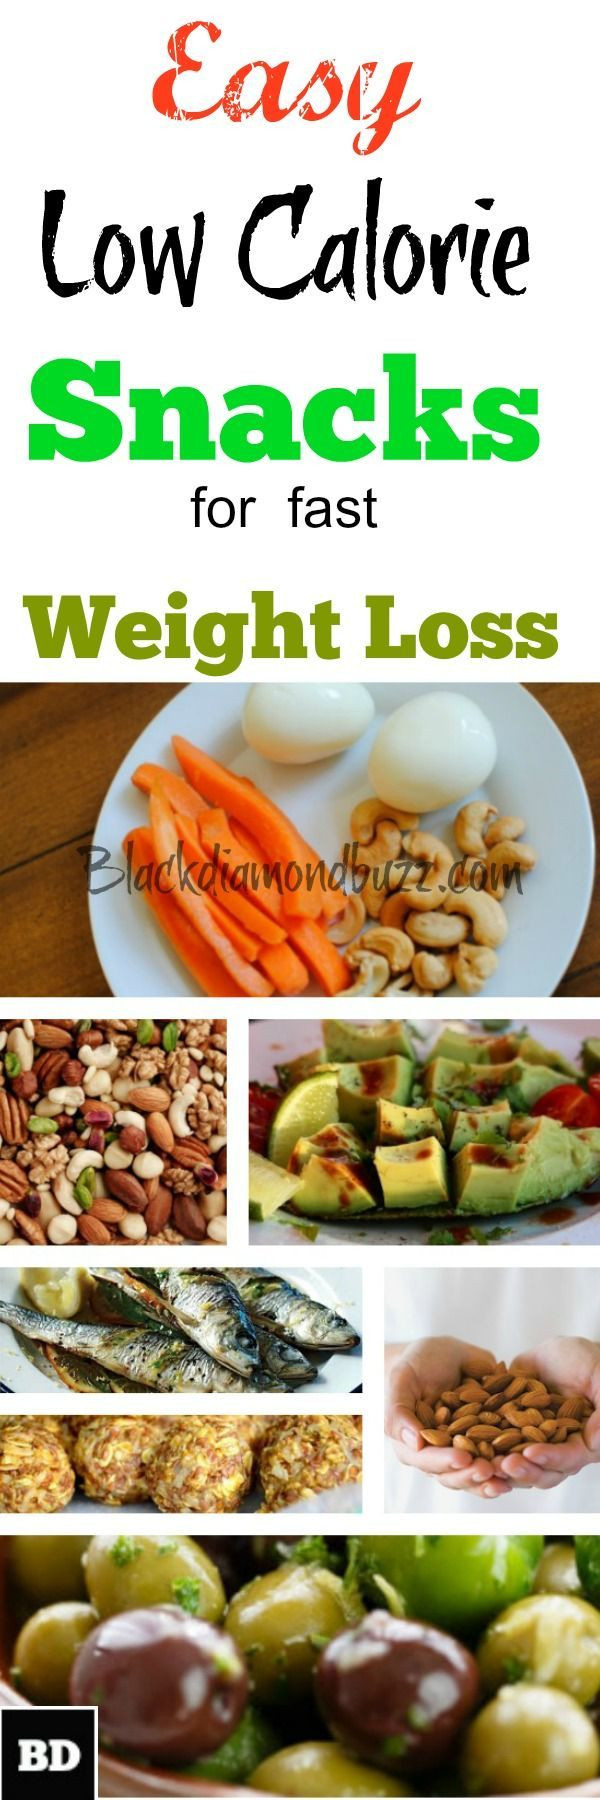 Healthy Meals And Snacks For Weight Loss
 Best 25 Weight loss snacks ideas on Pinterest